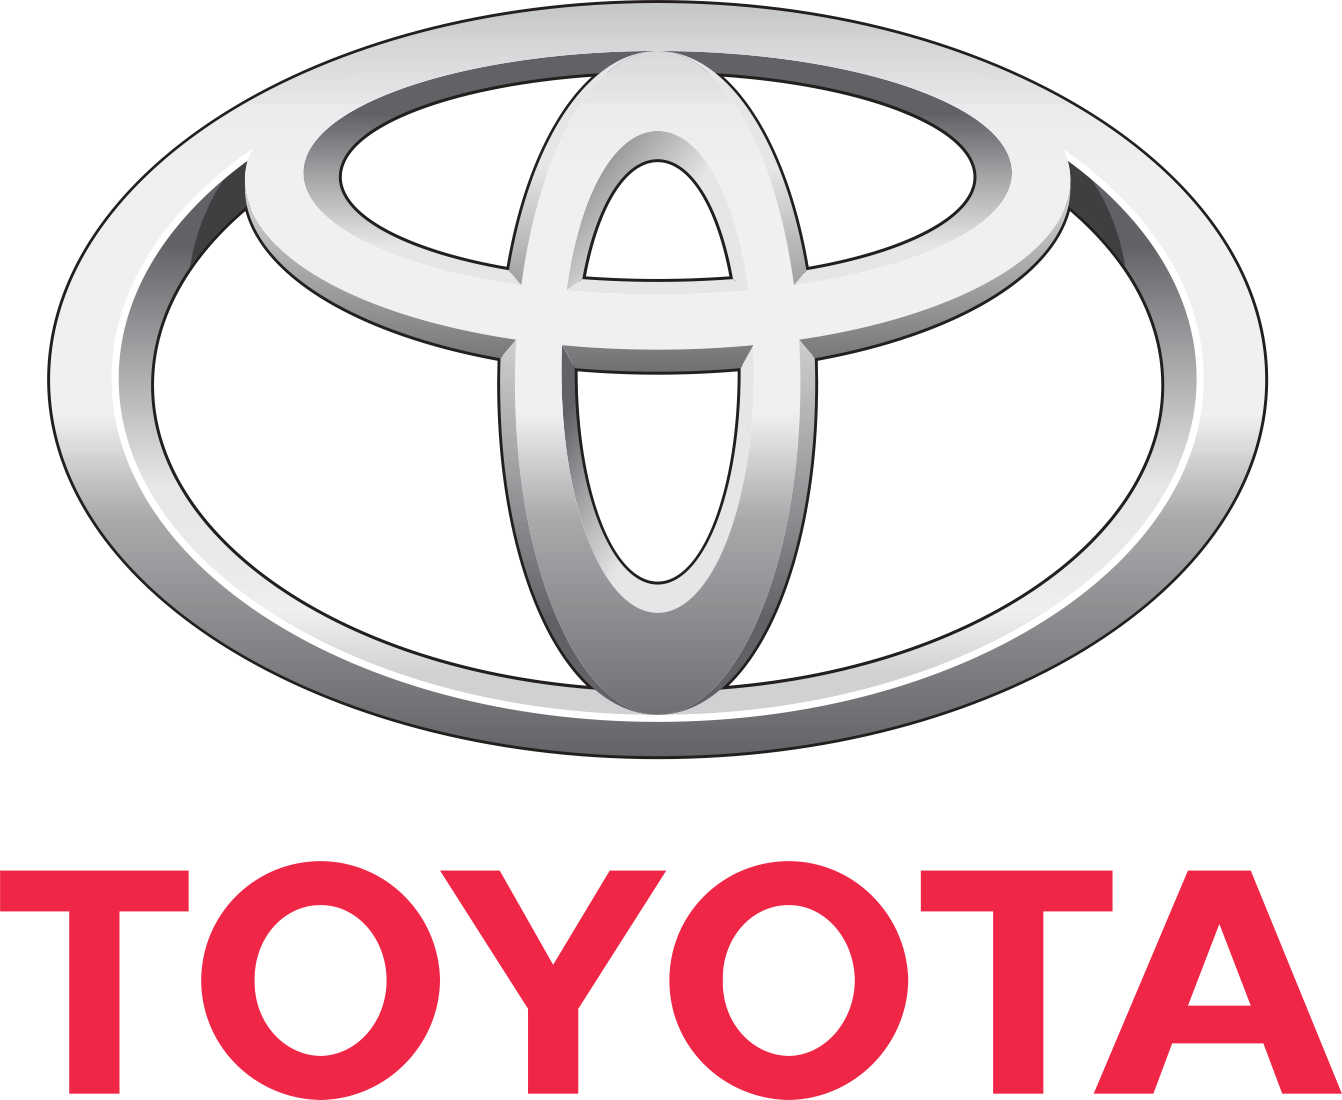 Top Toyota Logo Png - Toyota, Transparent background PNG HD thumbnail